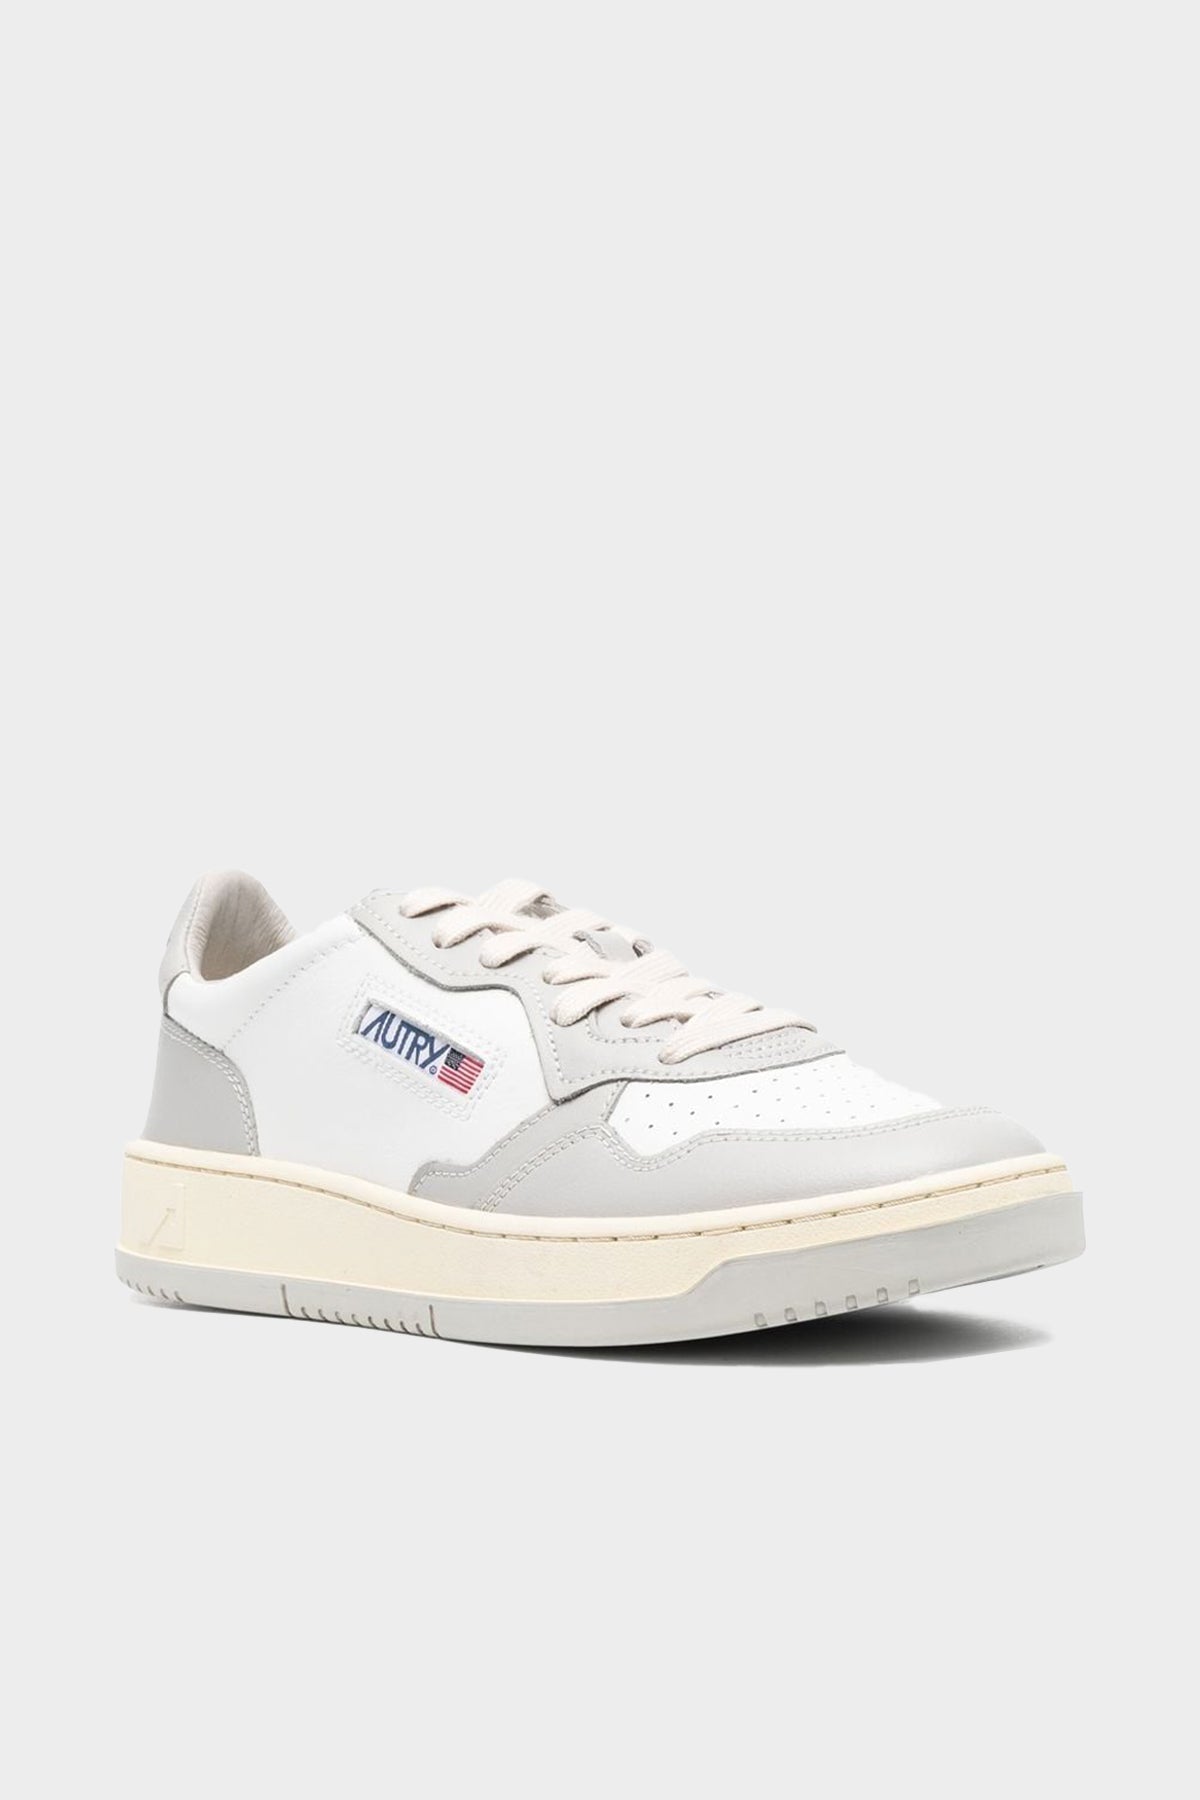 Two-Tone Medalist Low Leather Men Sneaker in White and Vapor - shop-olivia.com